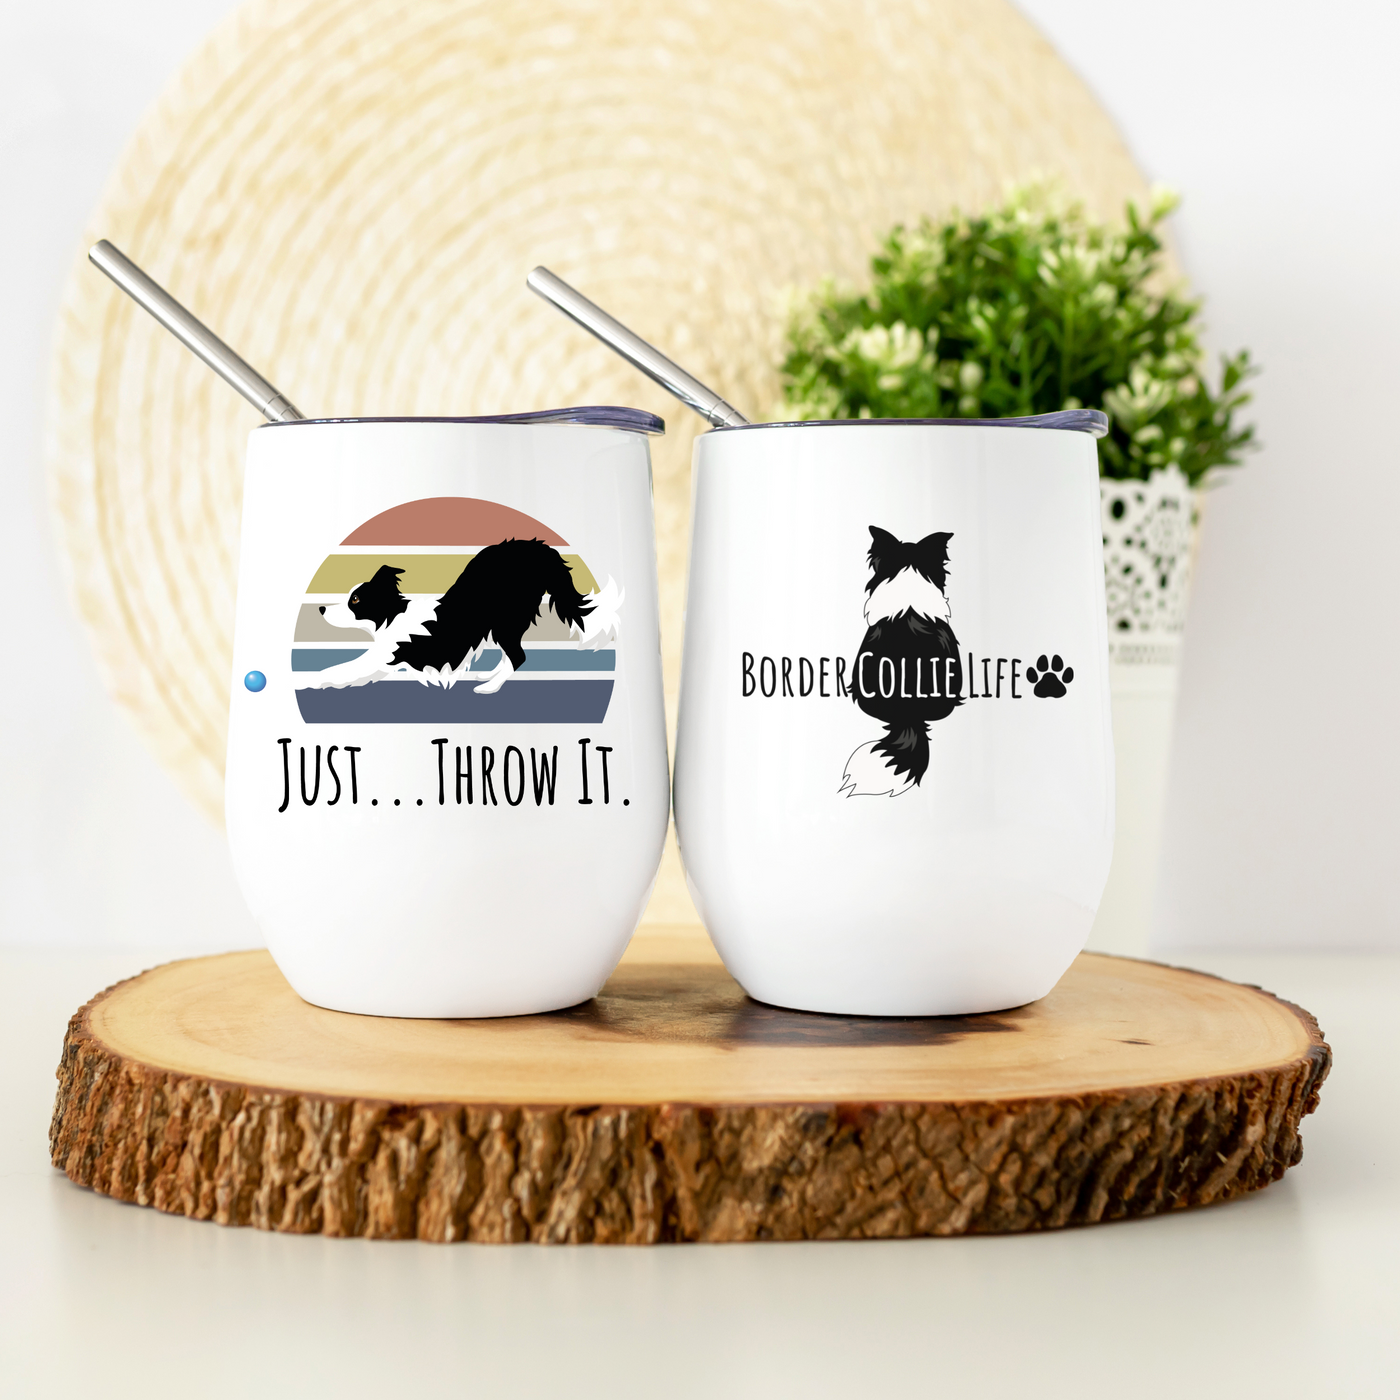 Just throw it border collie cup | just throw it retro border collie | Retro border collie | border collie tumbler | border collie mug | just throw it mug | border collie gift for border collie lovers